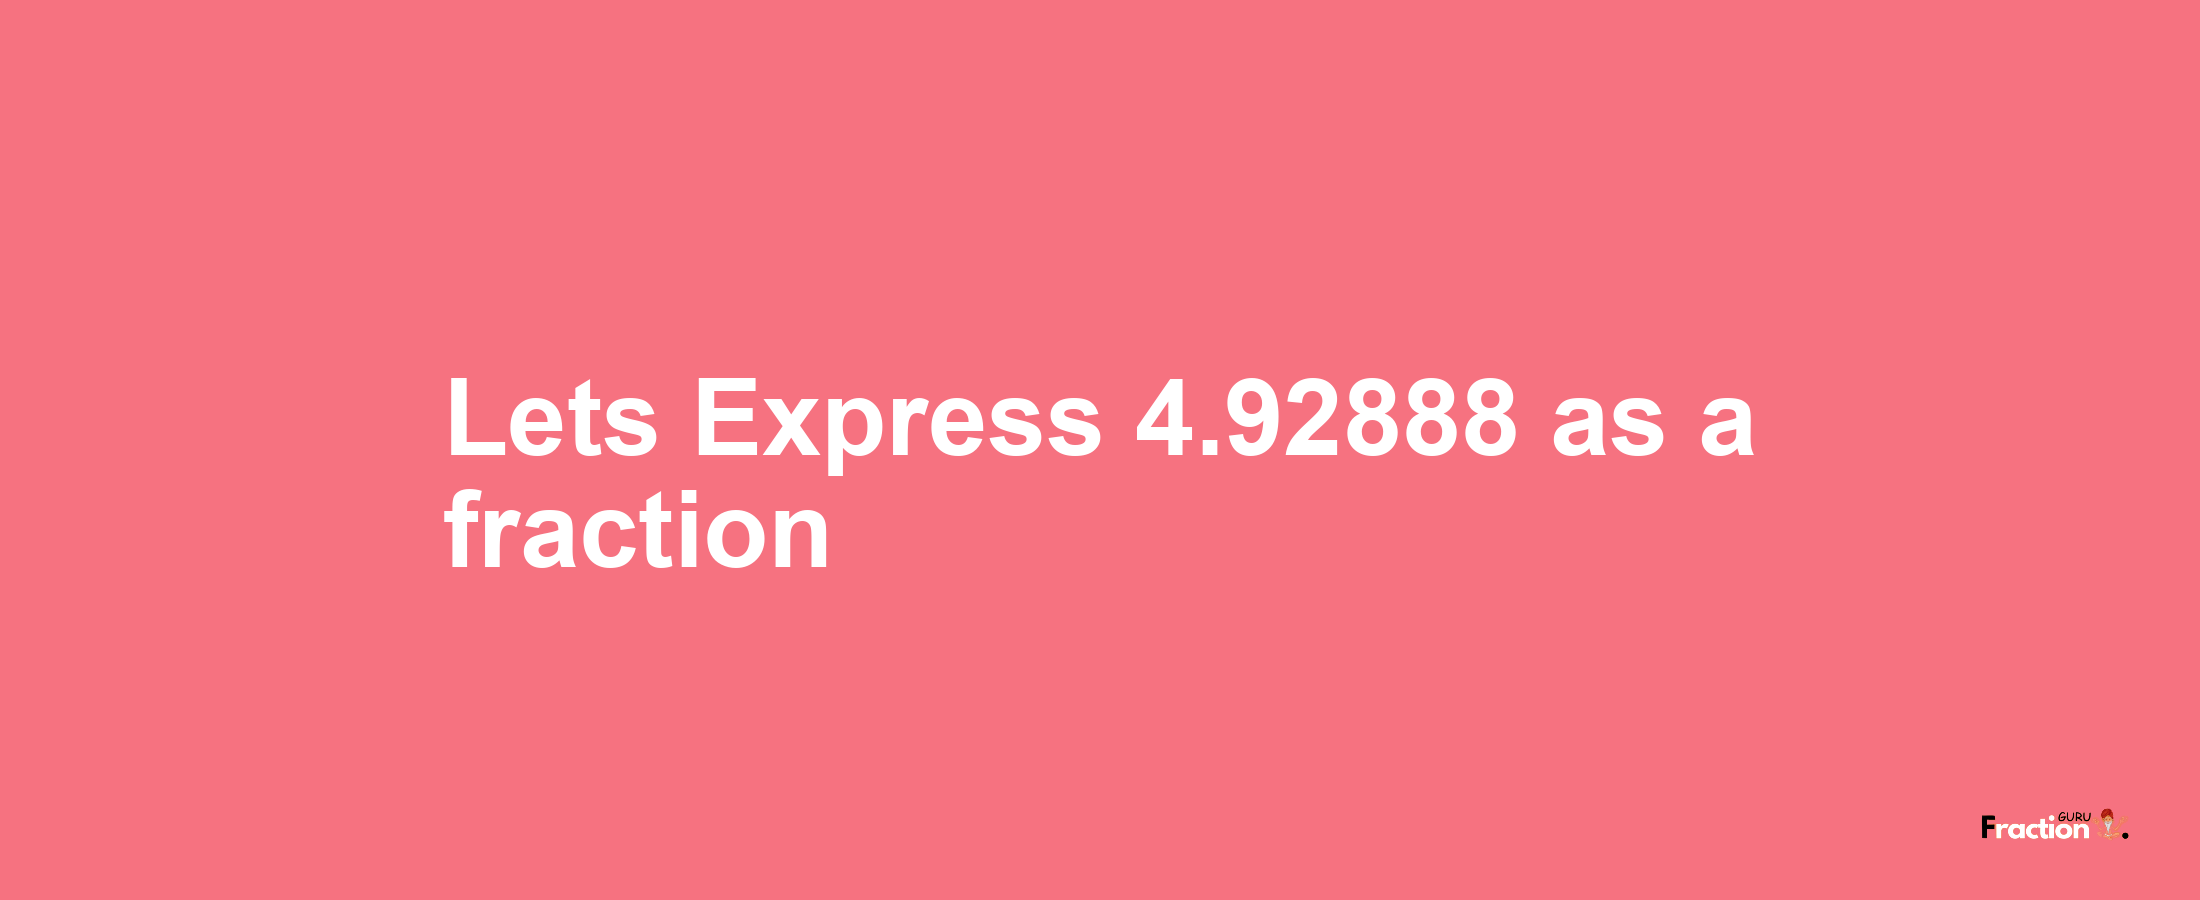 Lets Express 4.92888 as afraction